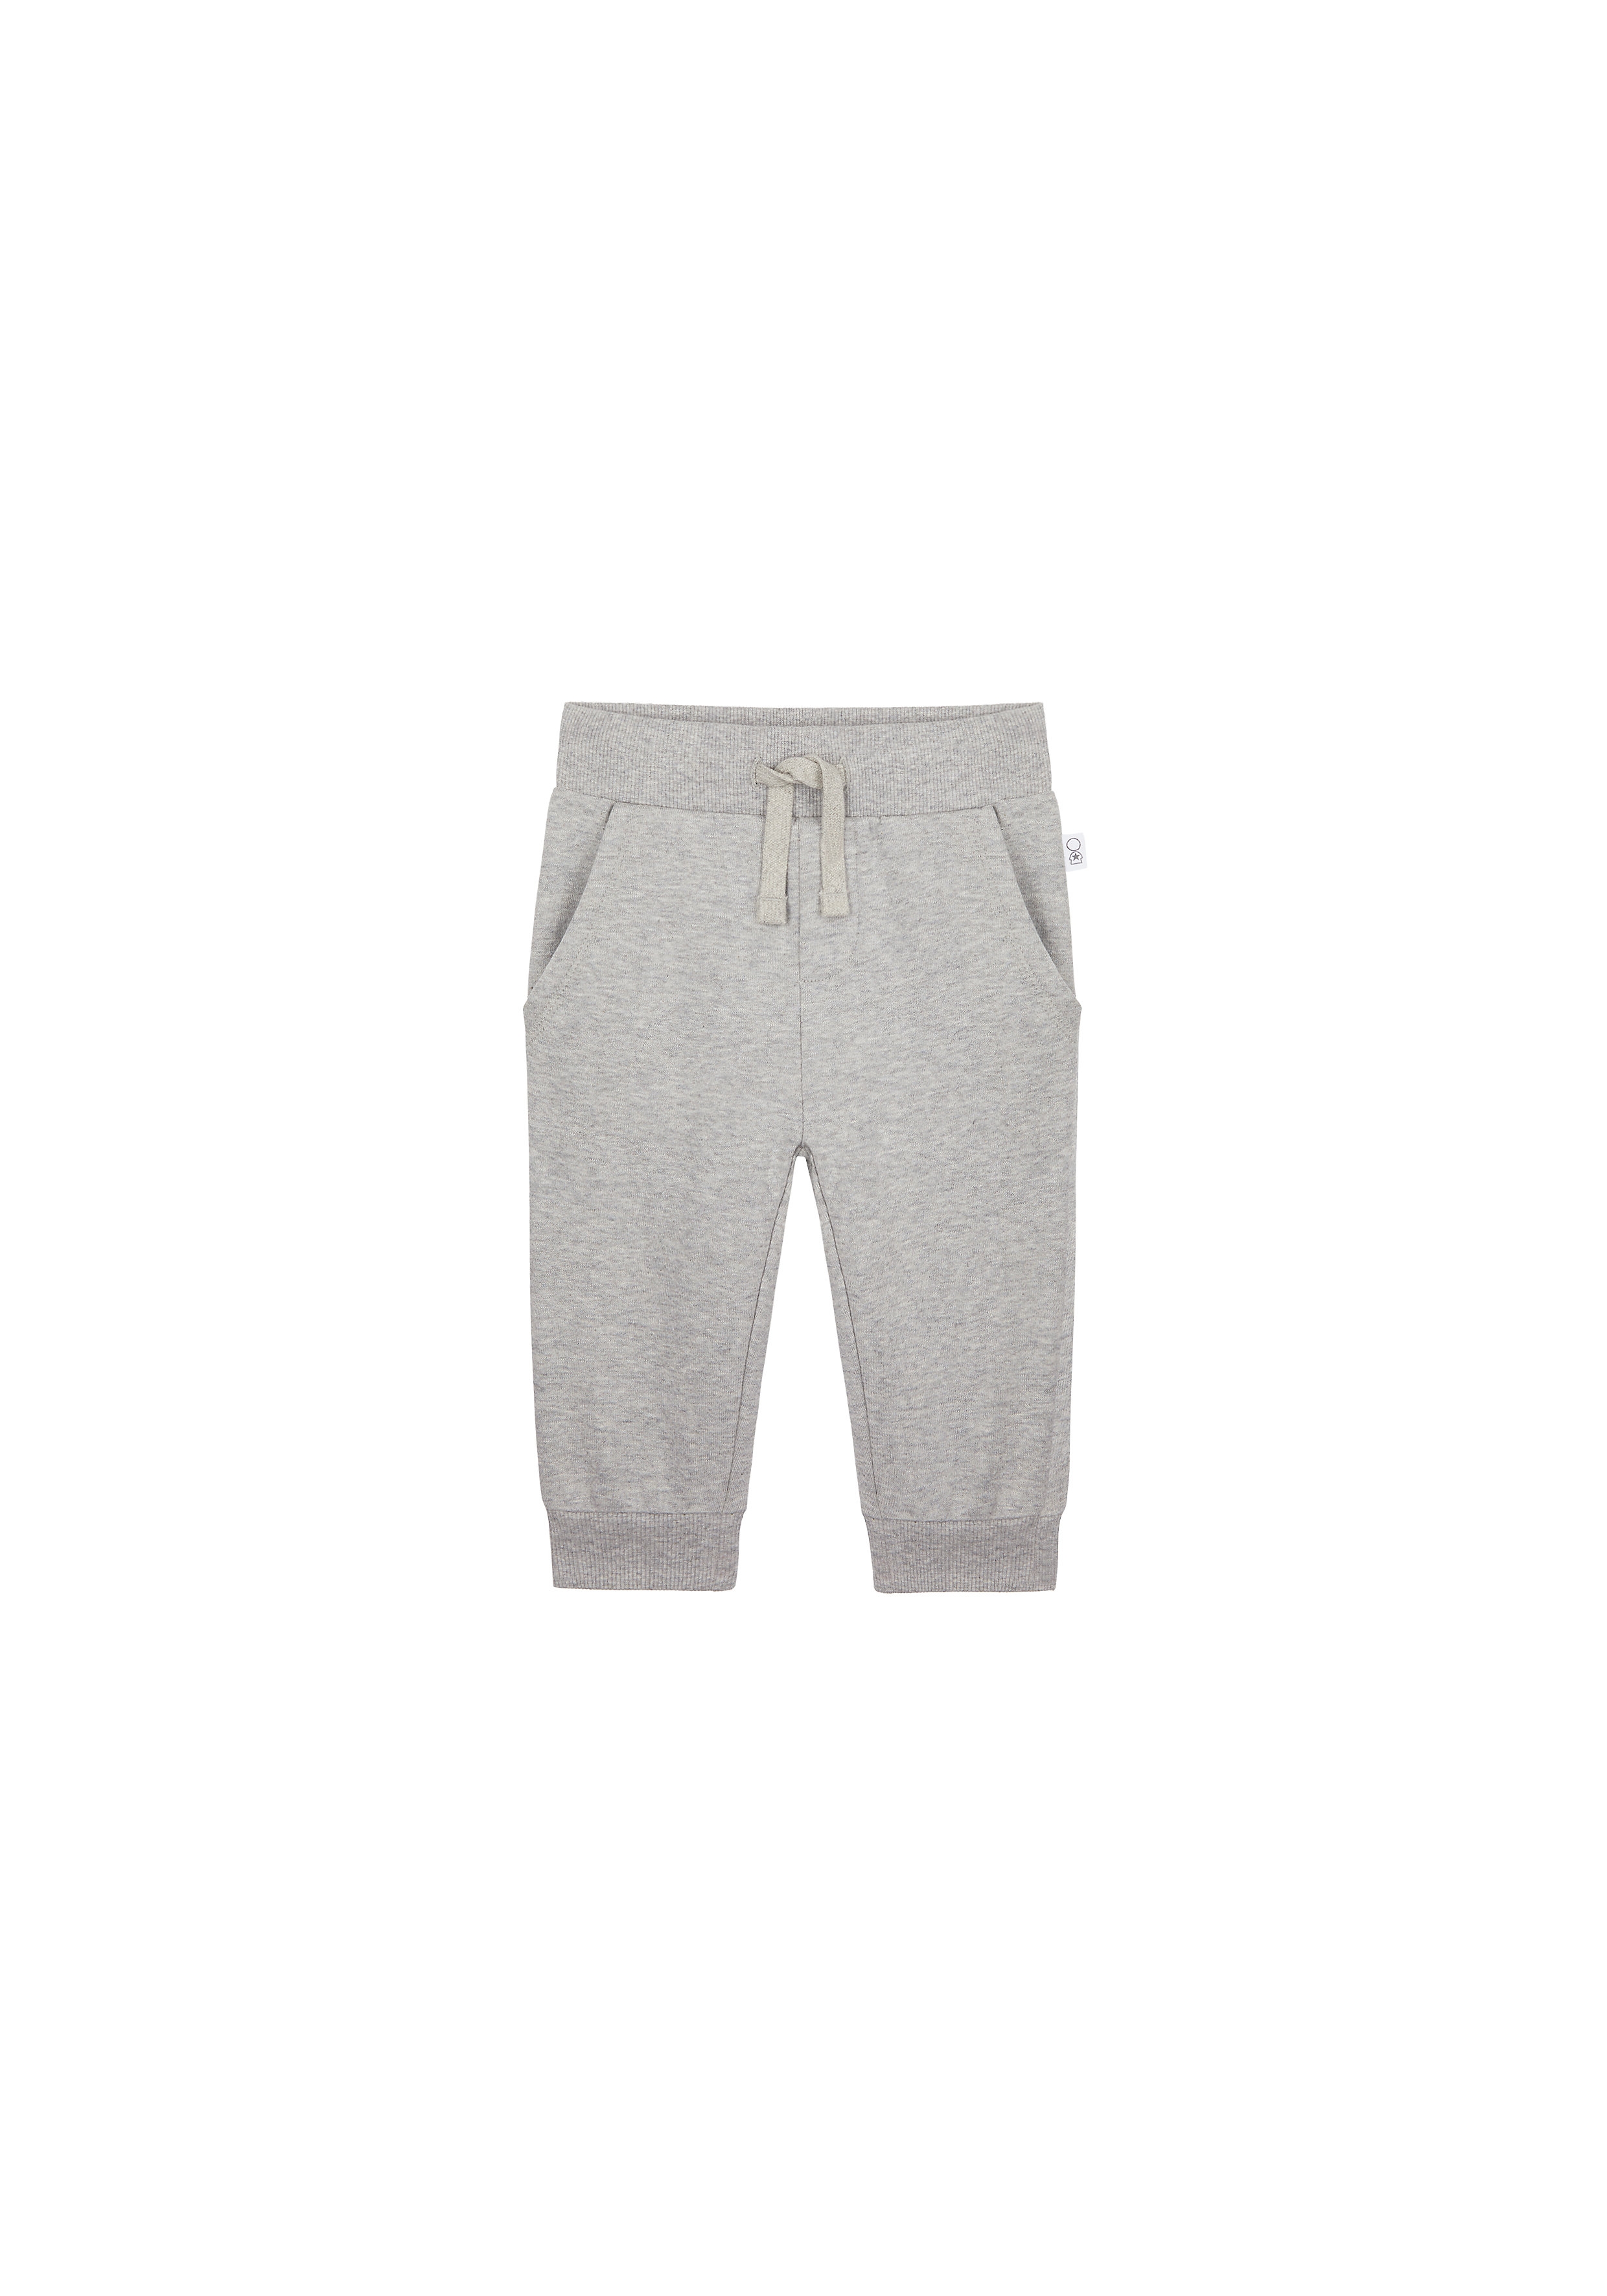 Mothercare | Boys Joggers With Side Pockets - Grey 0